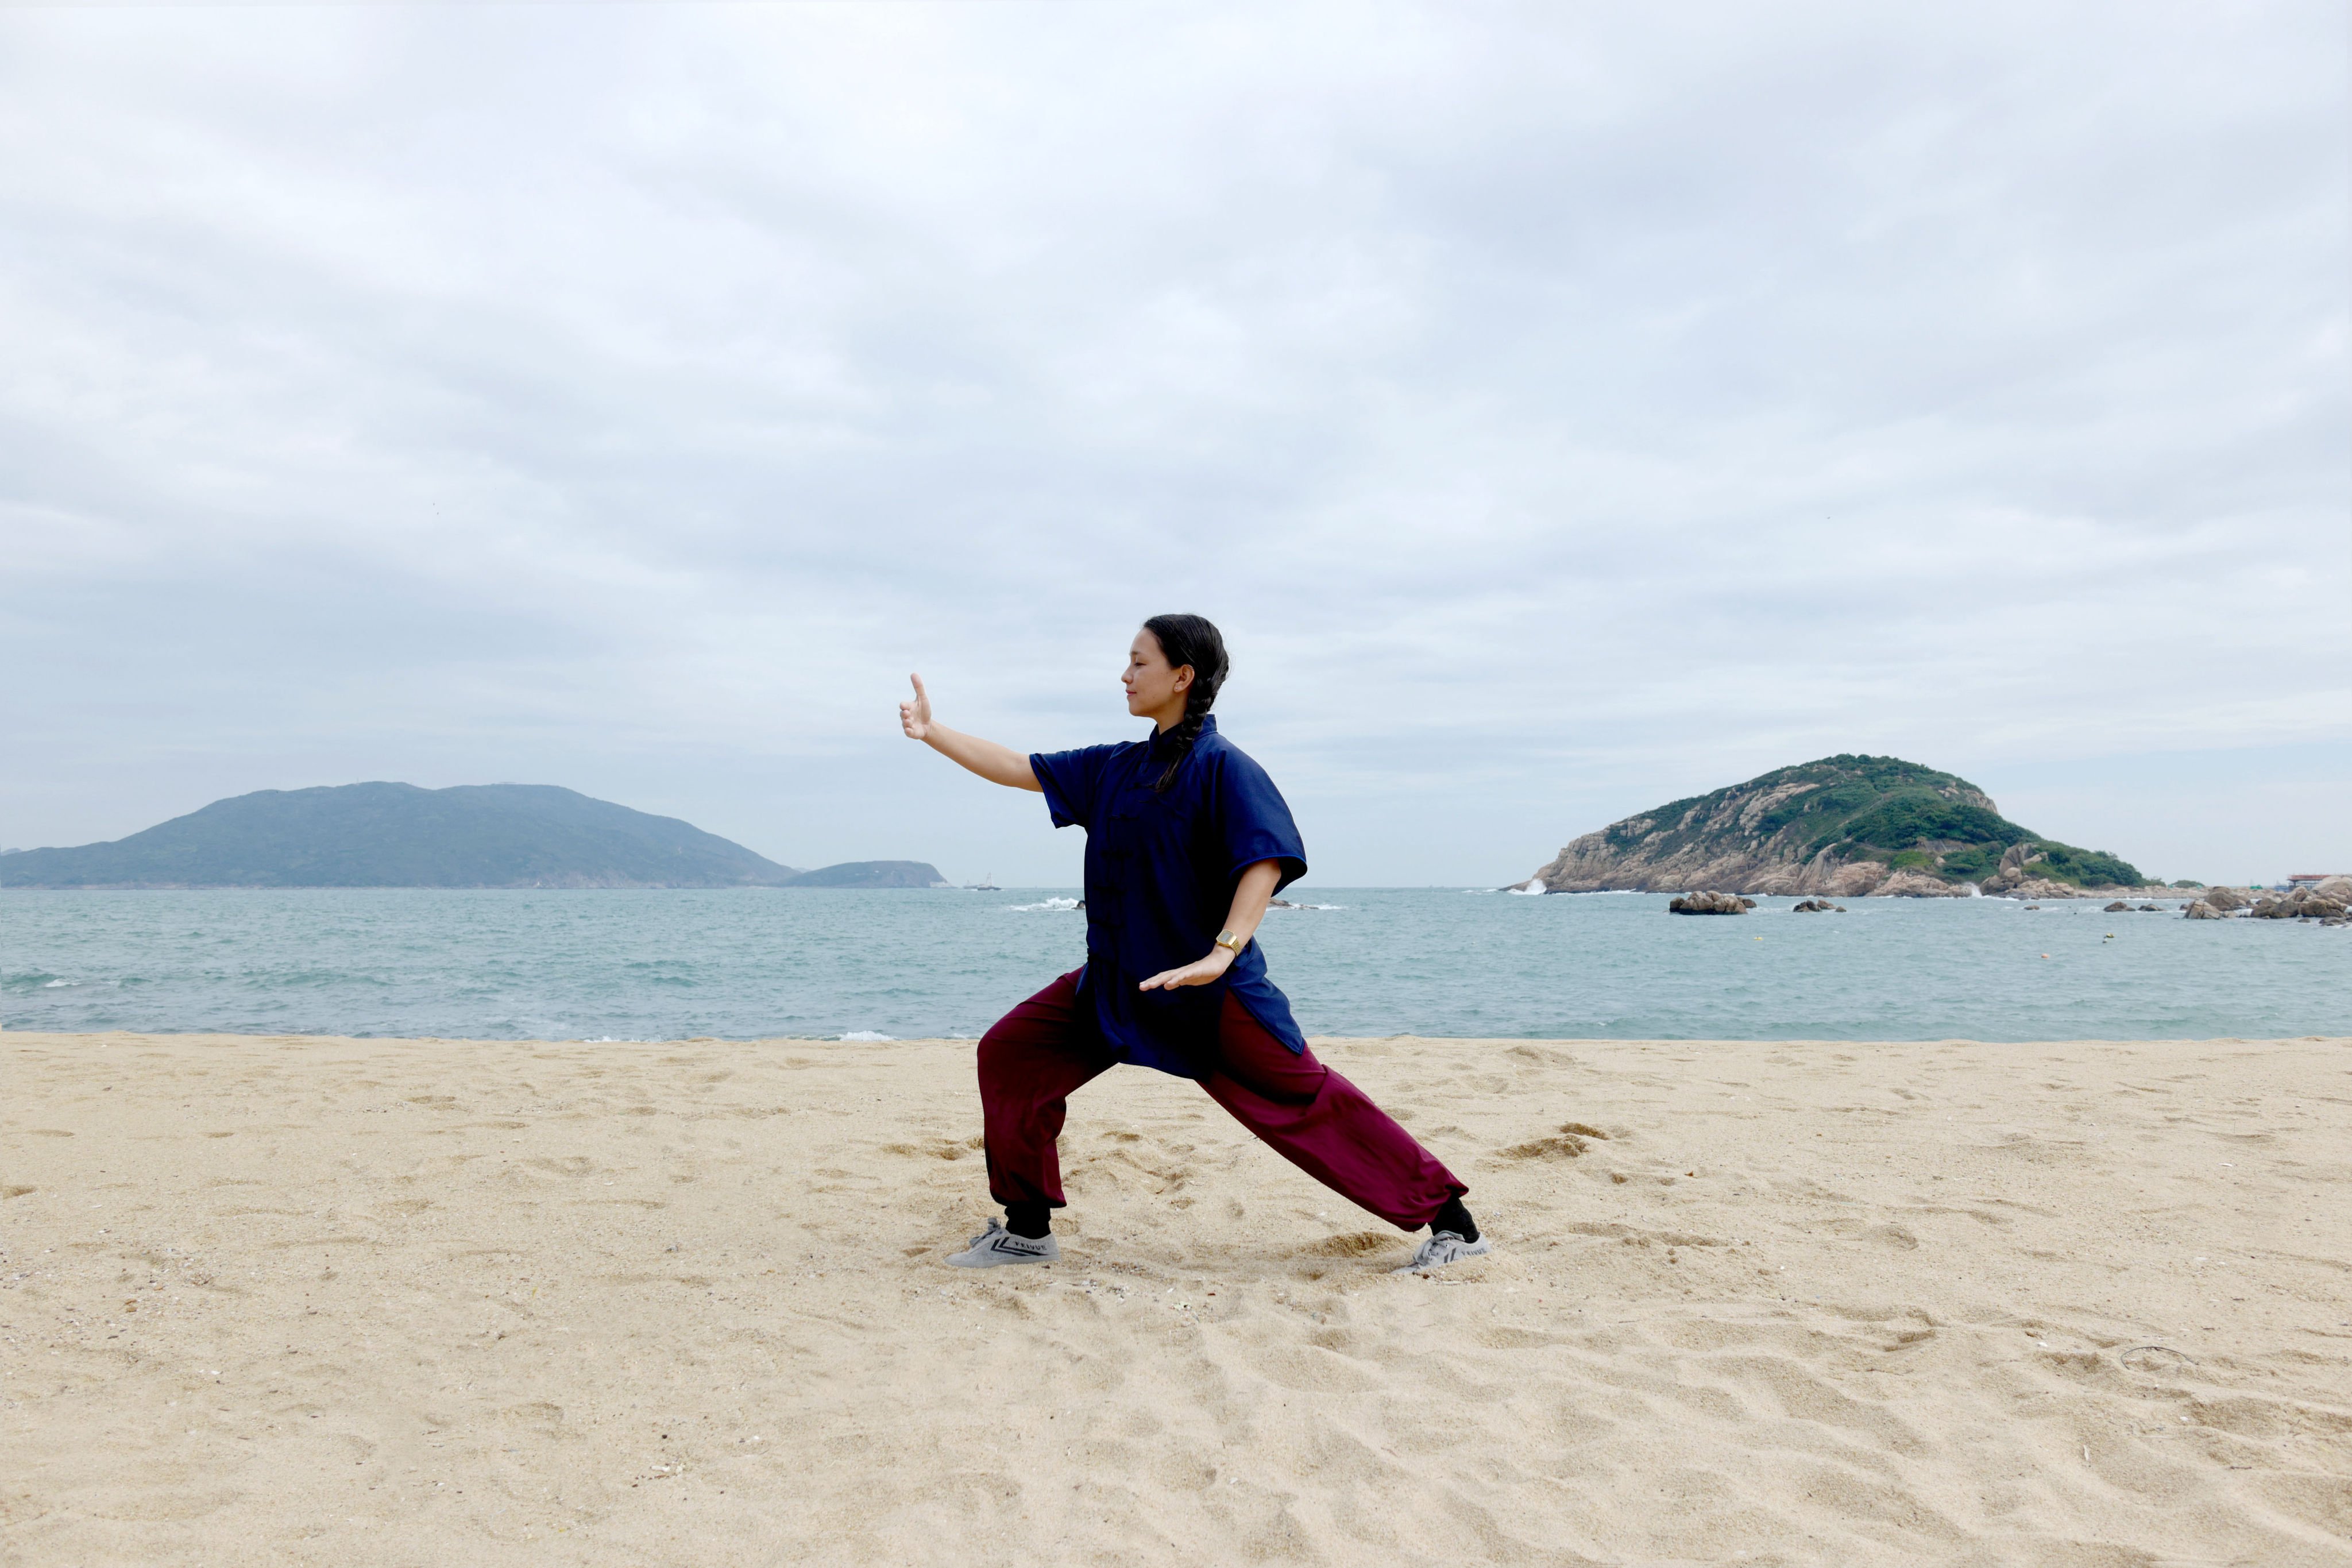 Sara Chung practises tai chi at a beach in Shek O in Hong Kong. A study suggests that this ancient Chinese martial art may help lower blood pressure in people at risk of developing hypertension more effectively than conventional aerobic exercise. Photo: Sara Chung